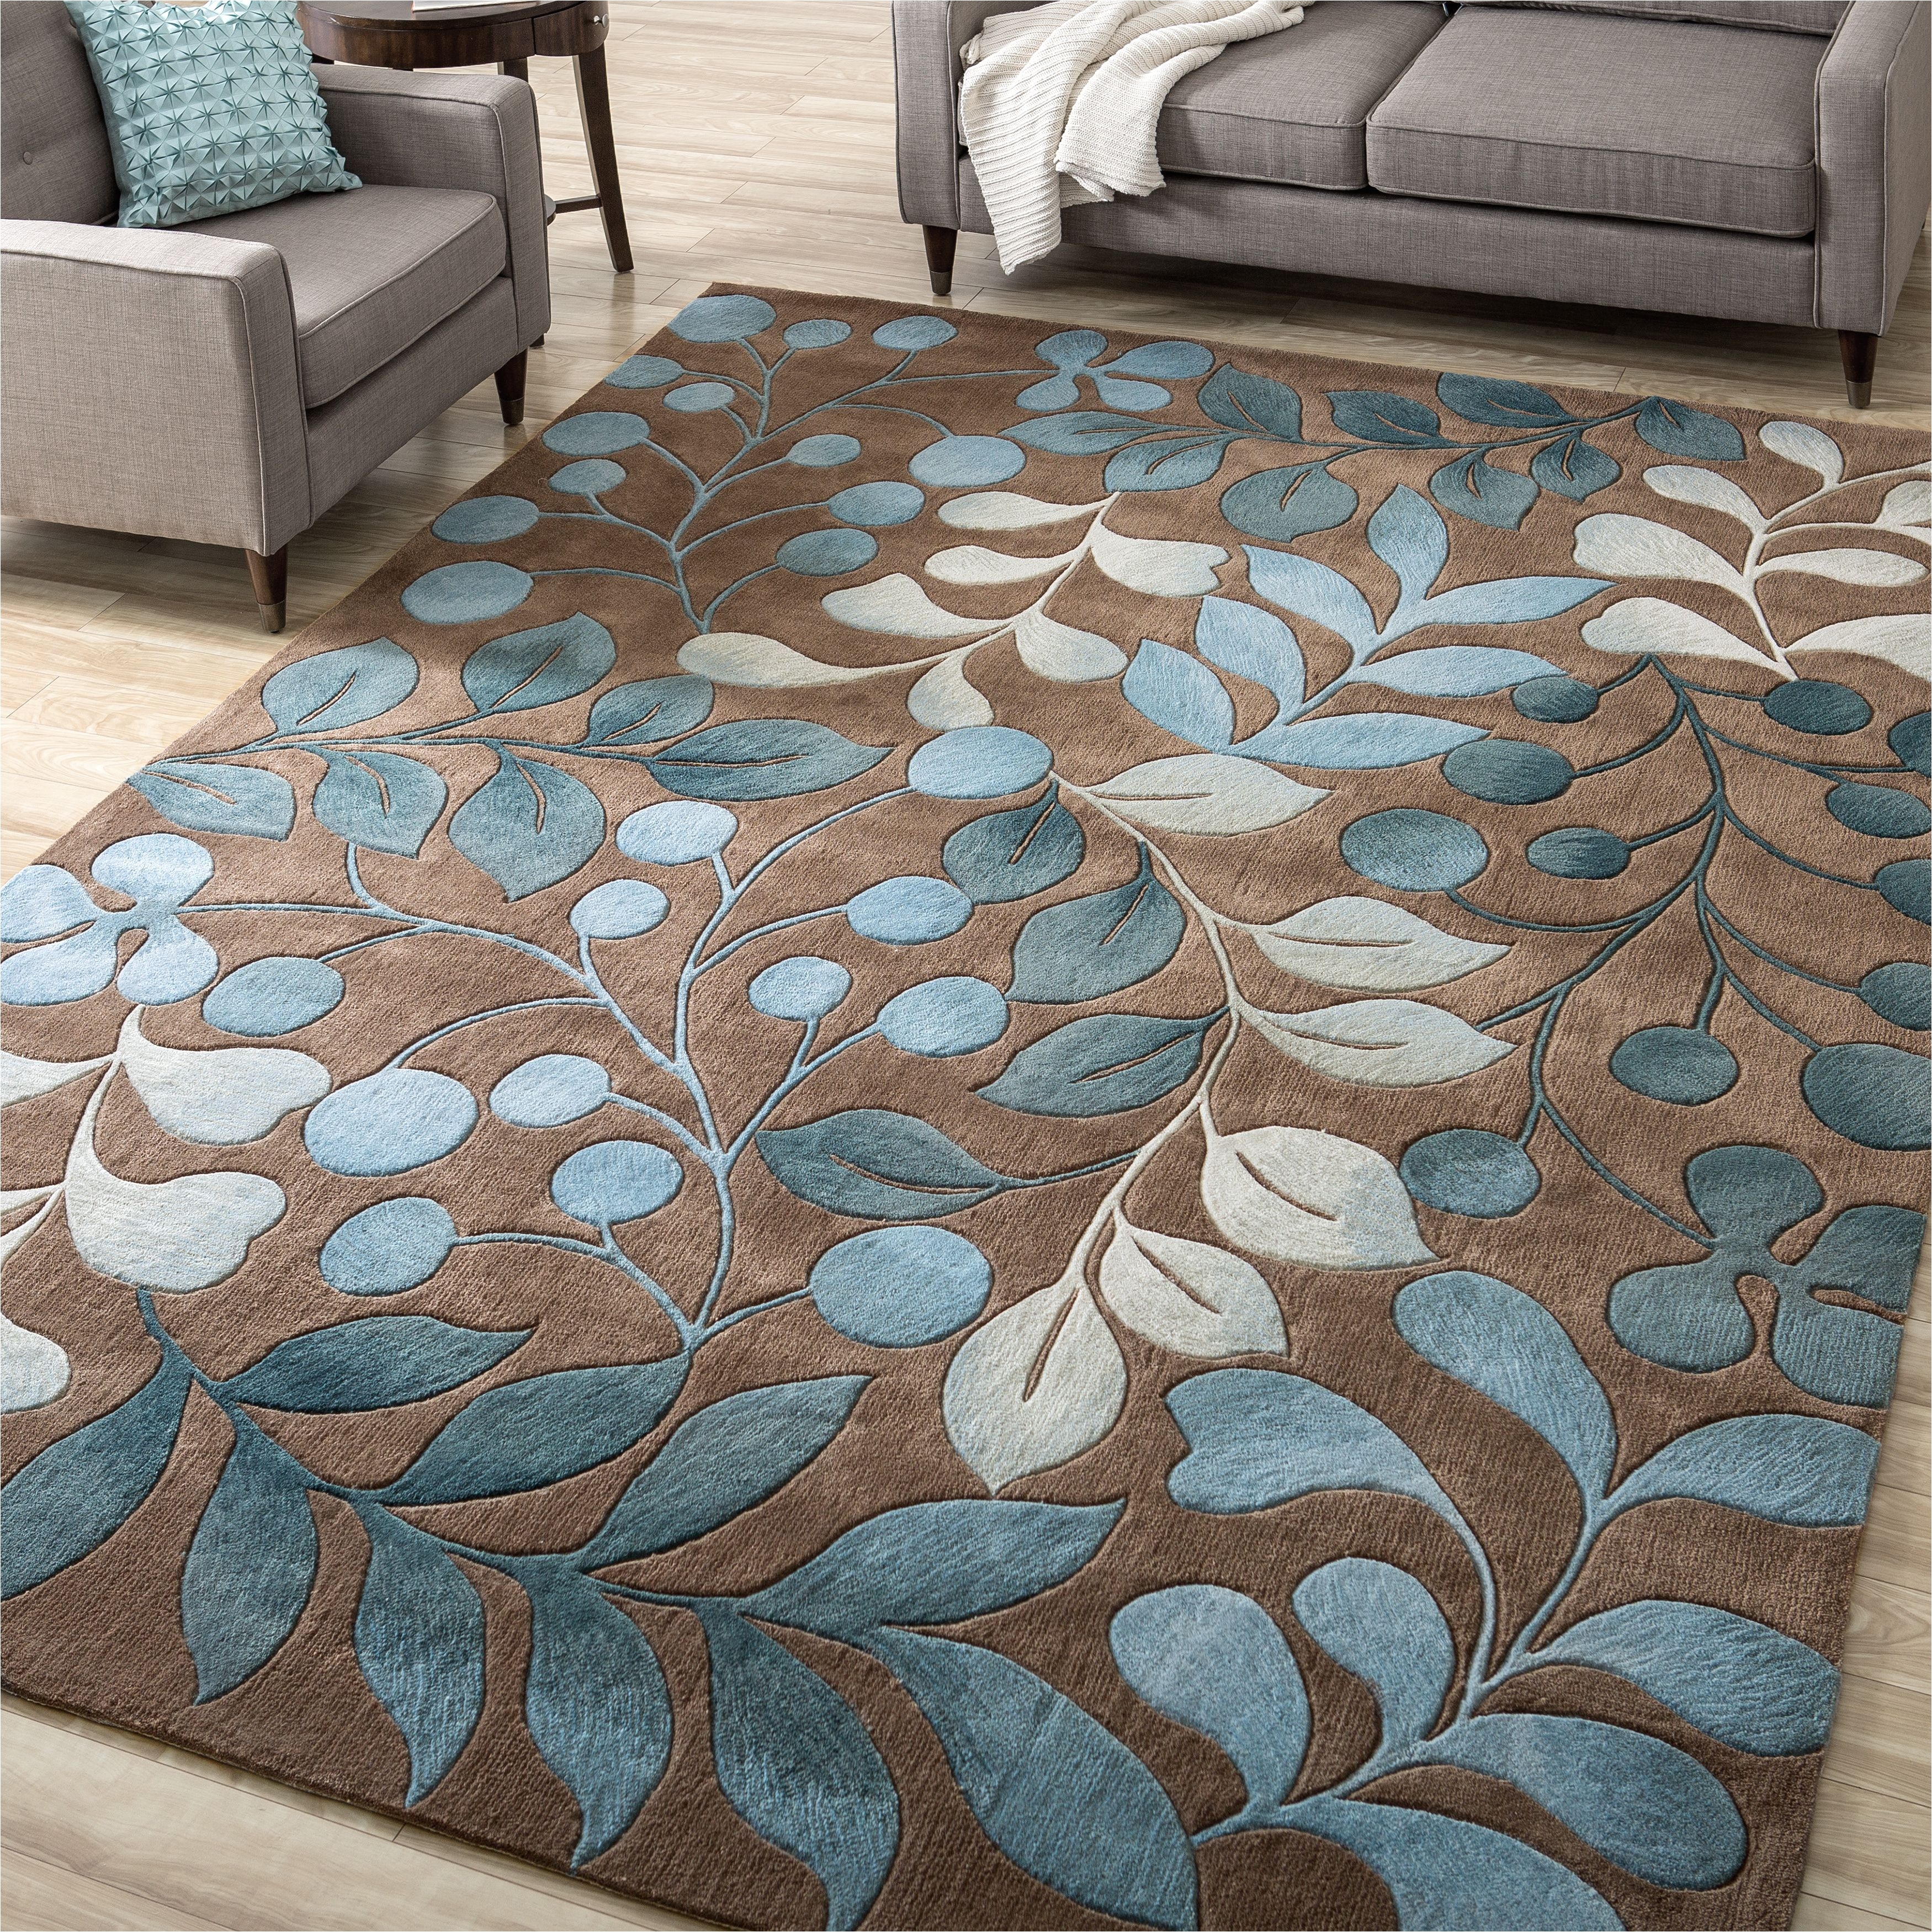 nourison hand tufted contours botanical mocha rug 8 x 10 6 overstock shopping great deals on nourison 7x9 10x14 rugs